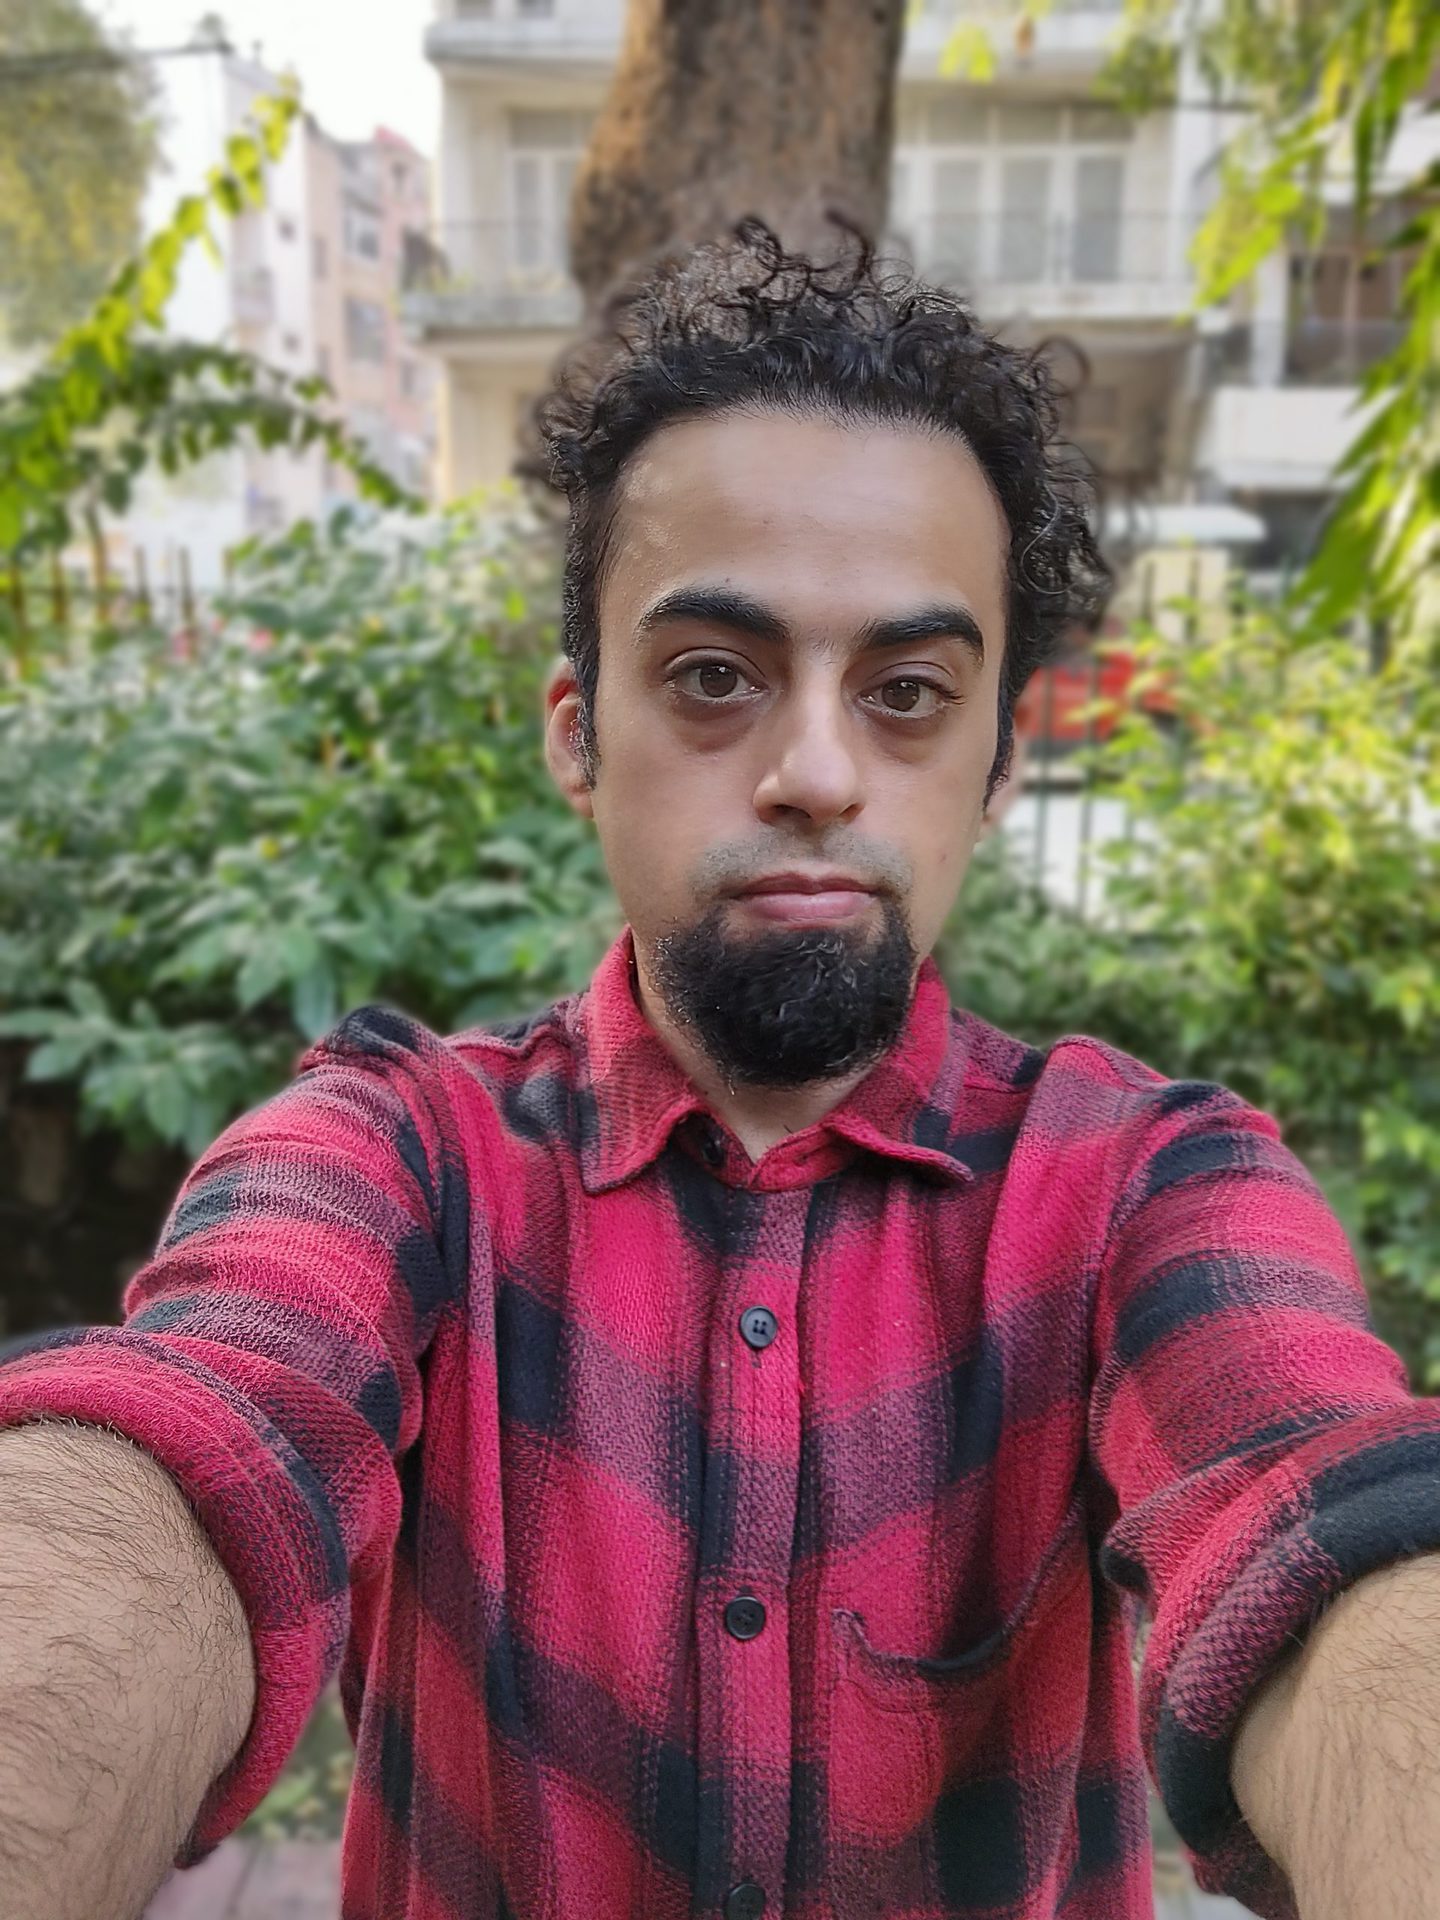 Moto Edge 20 pro selfie portrait of a man with dark curly hair and a beard, wearing a red and black checked shirt and standing in front of green bushes.